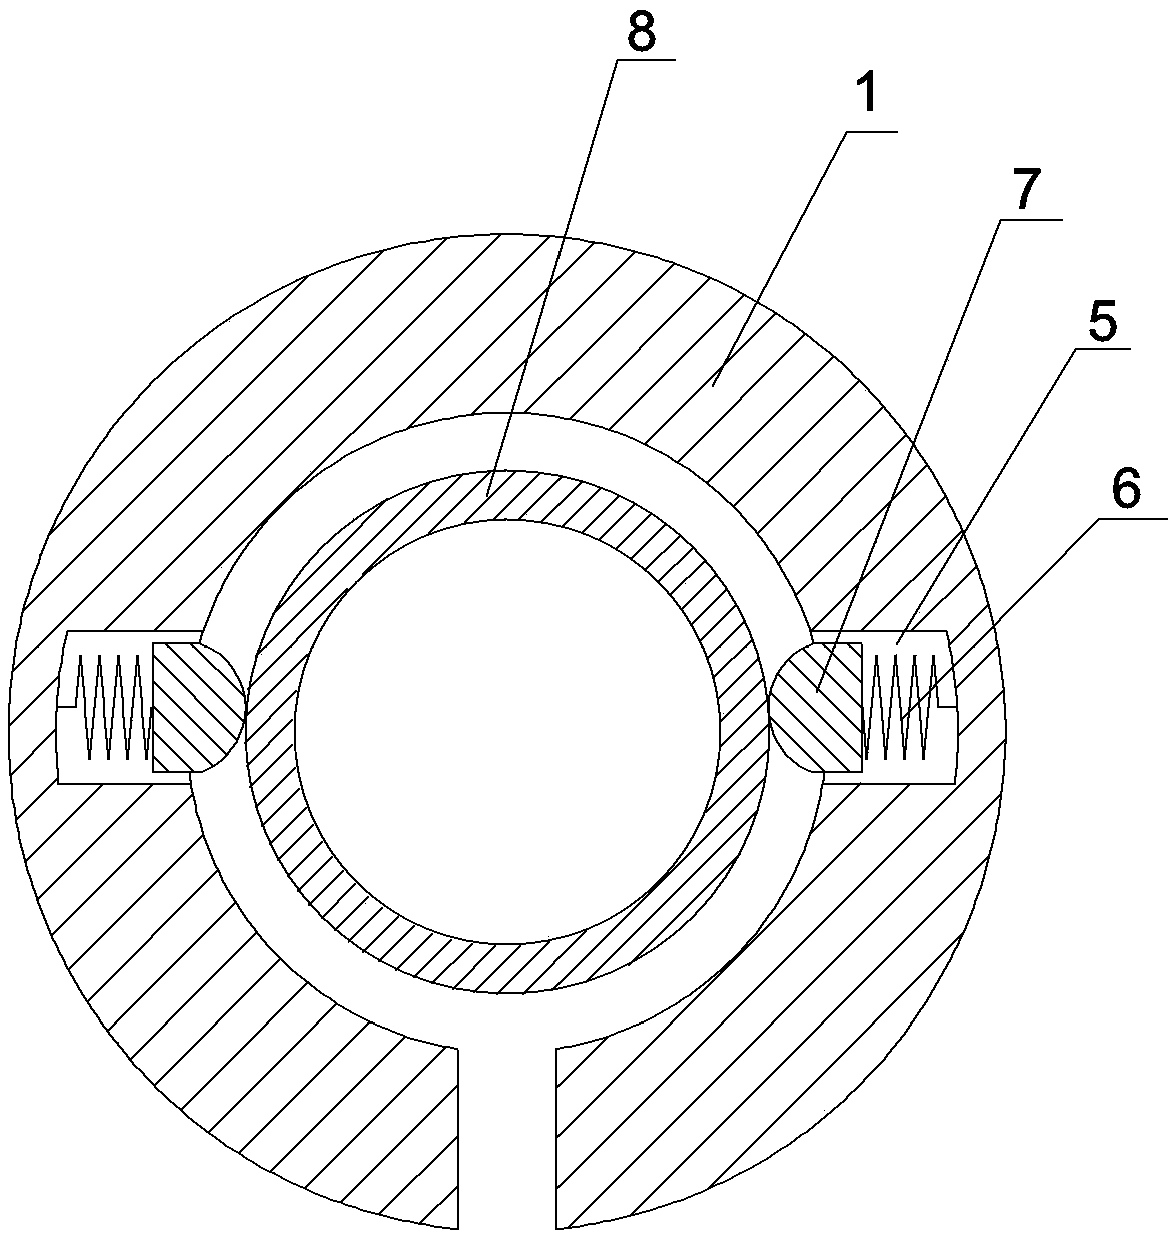 Medical pipeline marking device